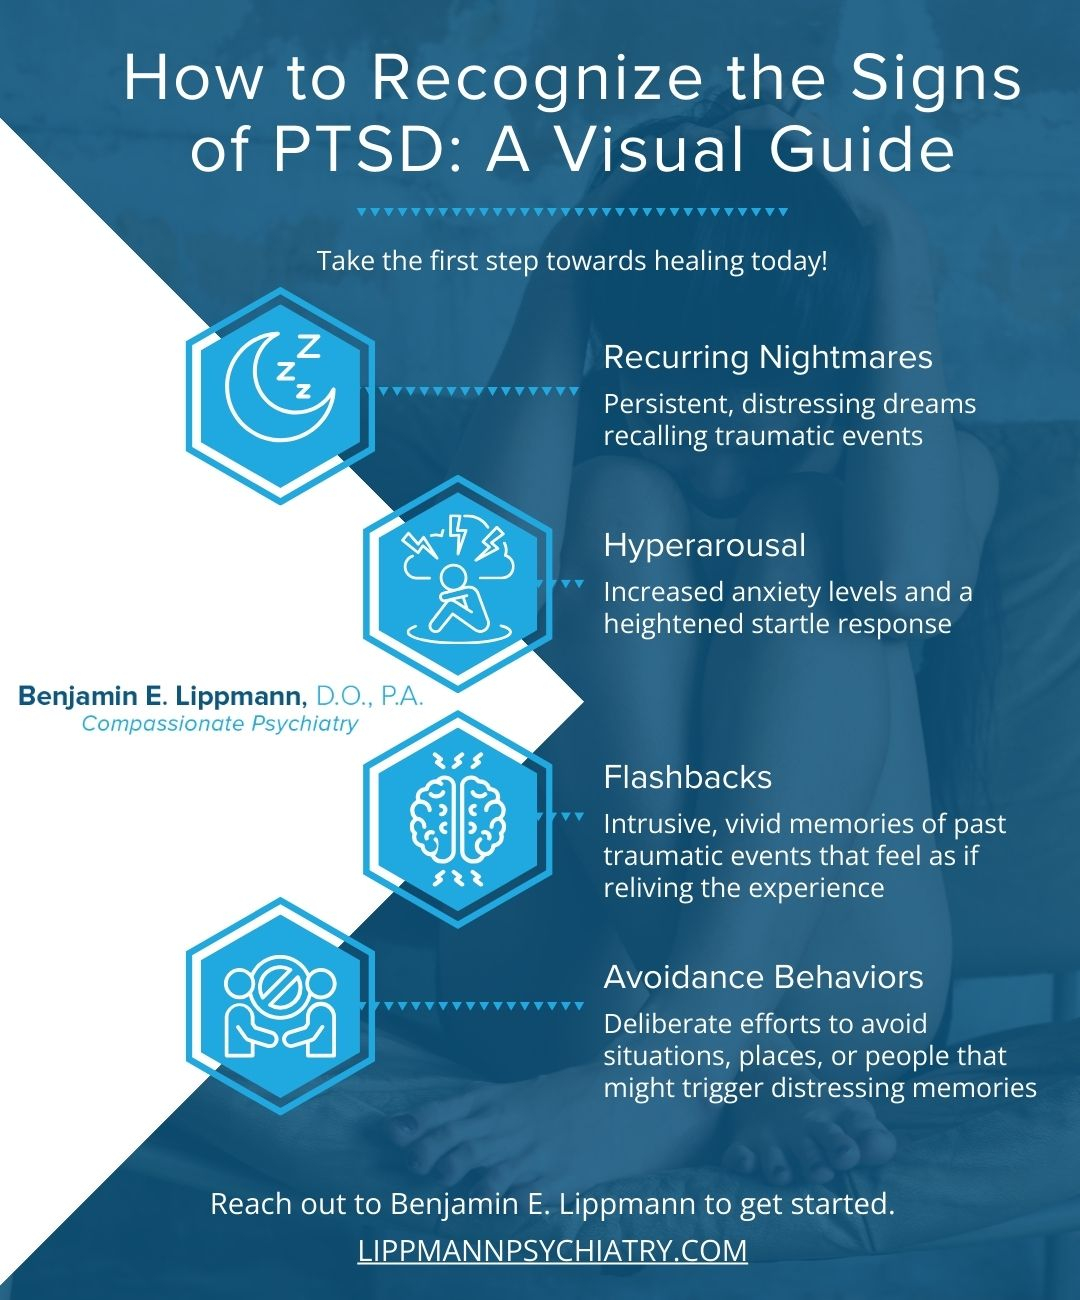 M35323 - Infographic - How to Recognize the Signs of PTSD A Visual Guide (1).jpg